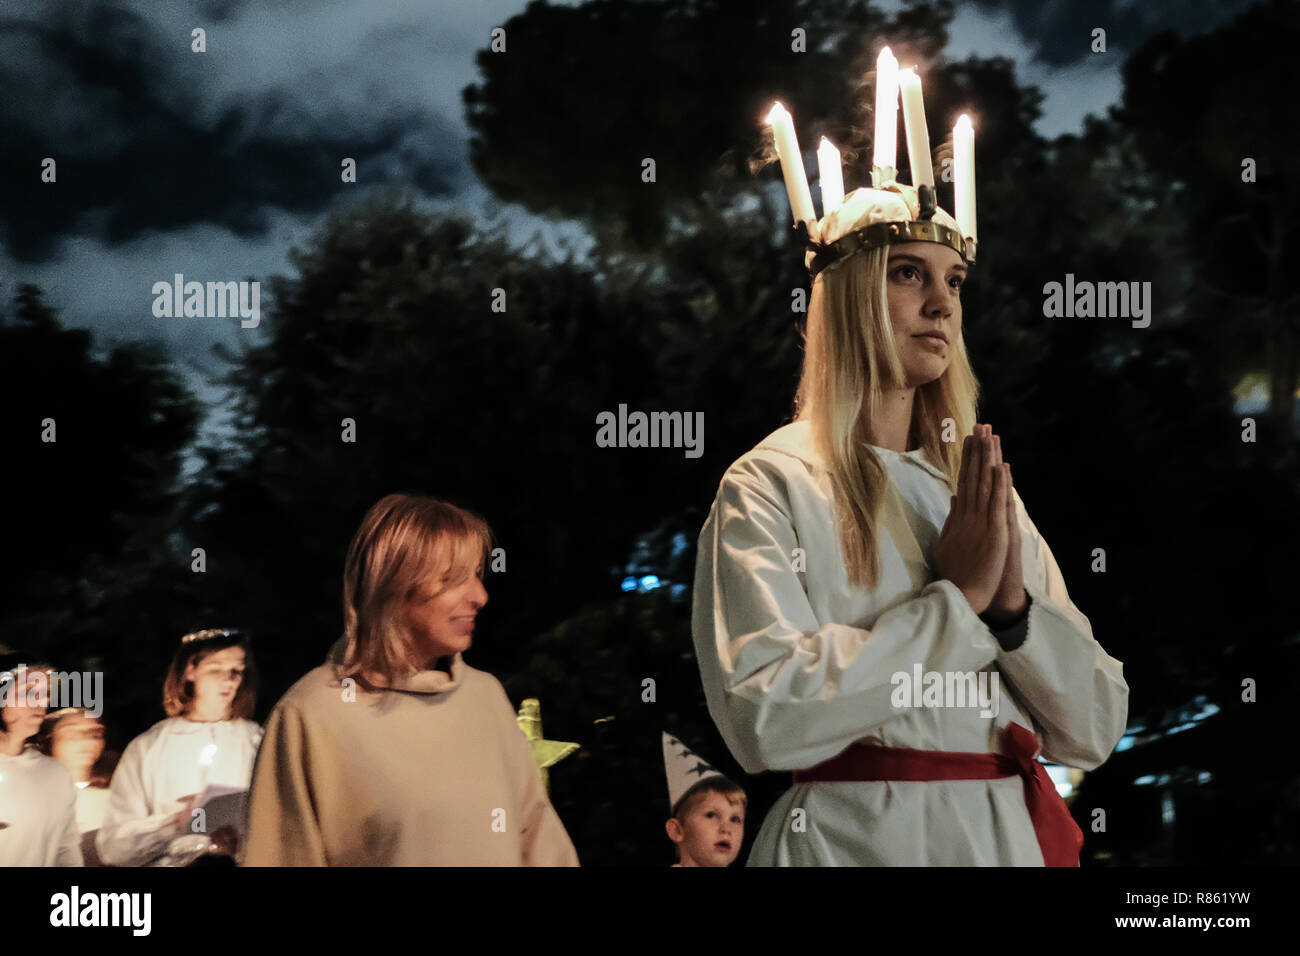 Jerusalem, Israel. 13th December, 2018. The Swedish Theological Institute (STI) in Jerusalem hosts Santa Lucia Day celebrations commemorating Lucia of Syracuse (283-304), Saint Lucy, Saint Lucia, or Sancta Lucia. The feast has become a festival of light, particularly celebrated in Scandinavian countries, where young girls traditionally dressed in white with a red sash, carry palms and wear wreaths of candles on their heads. Credit: Nir Alon/Alamy Live News Stock Photo